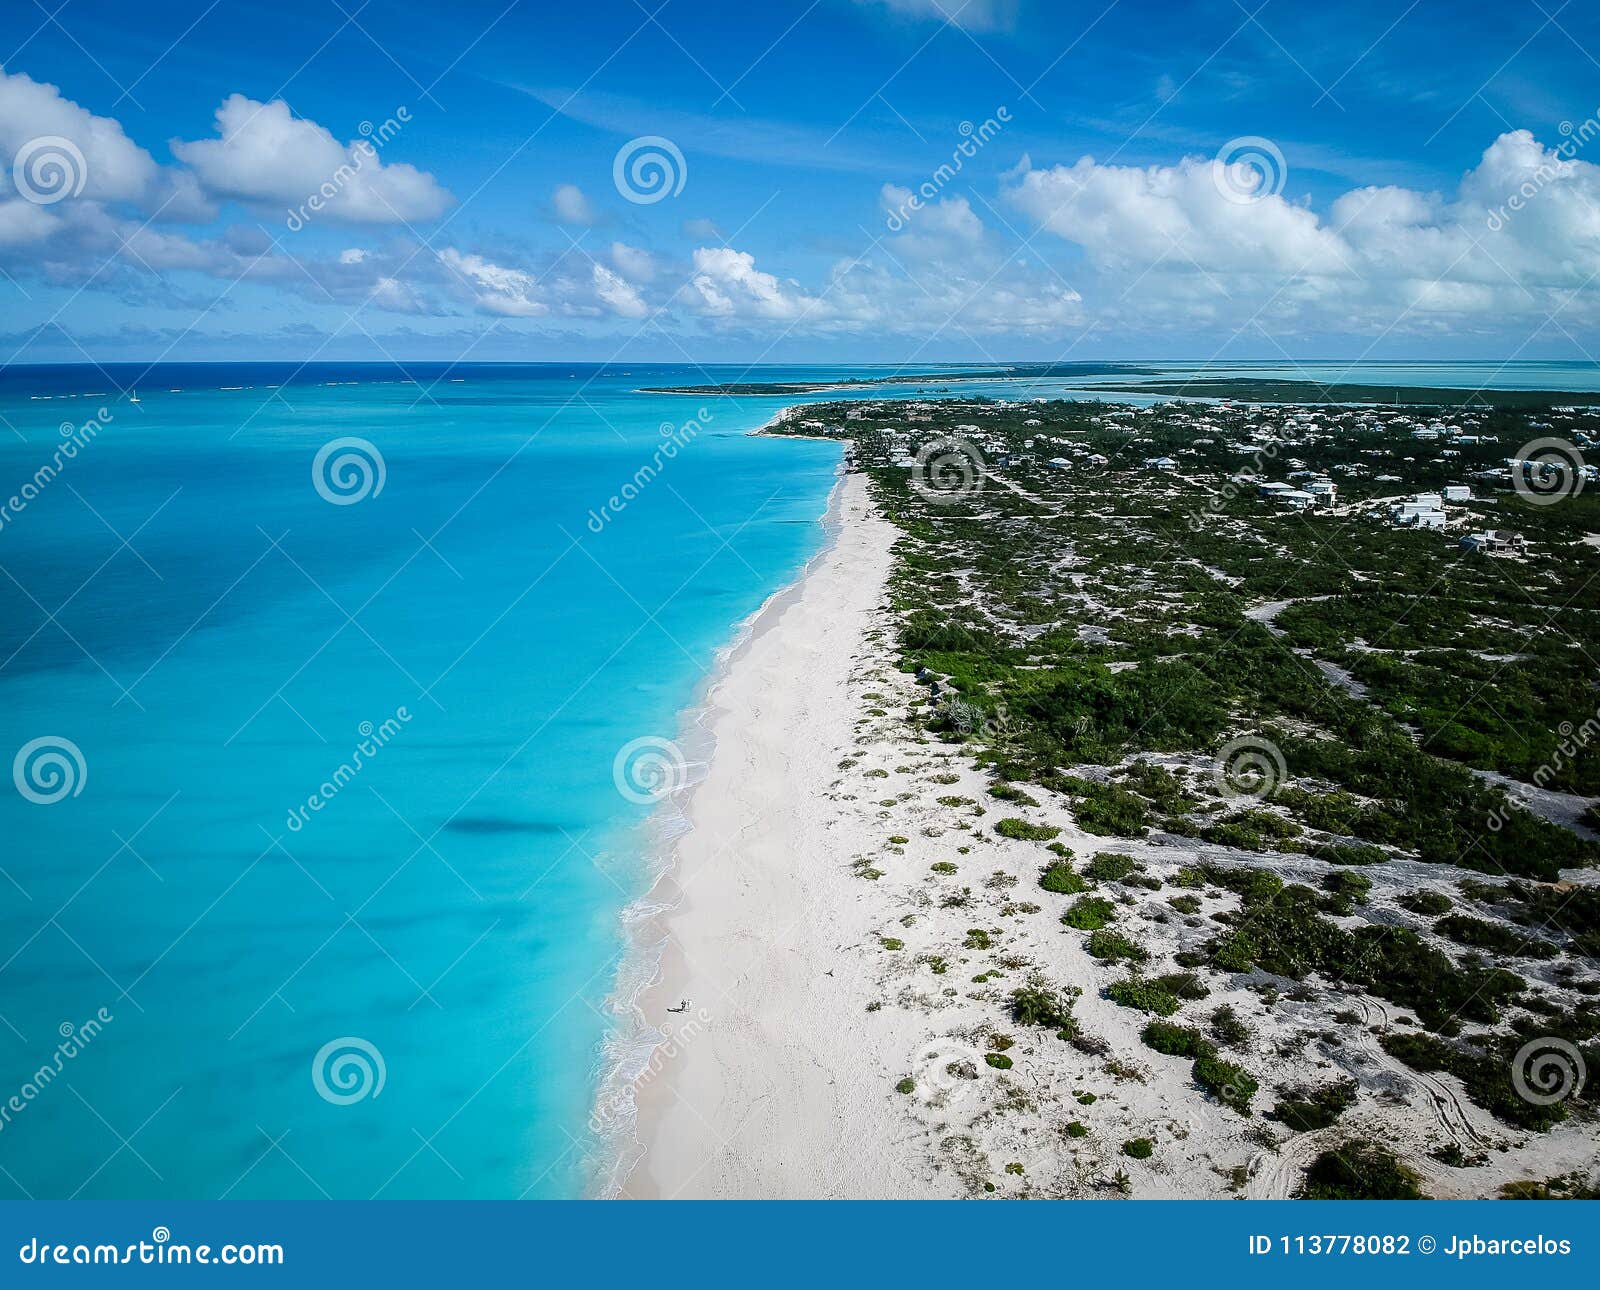 drone photo grace bay beach, providenciales, turks and caicos